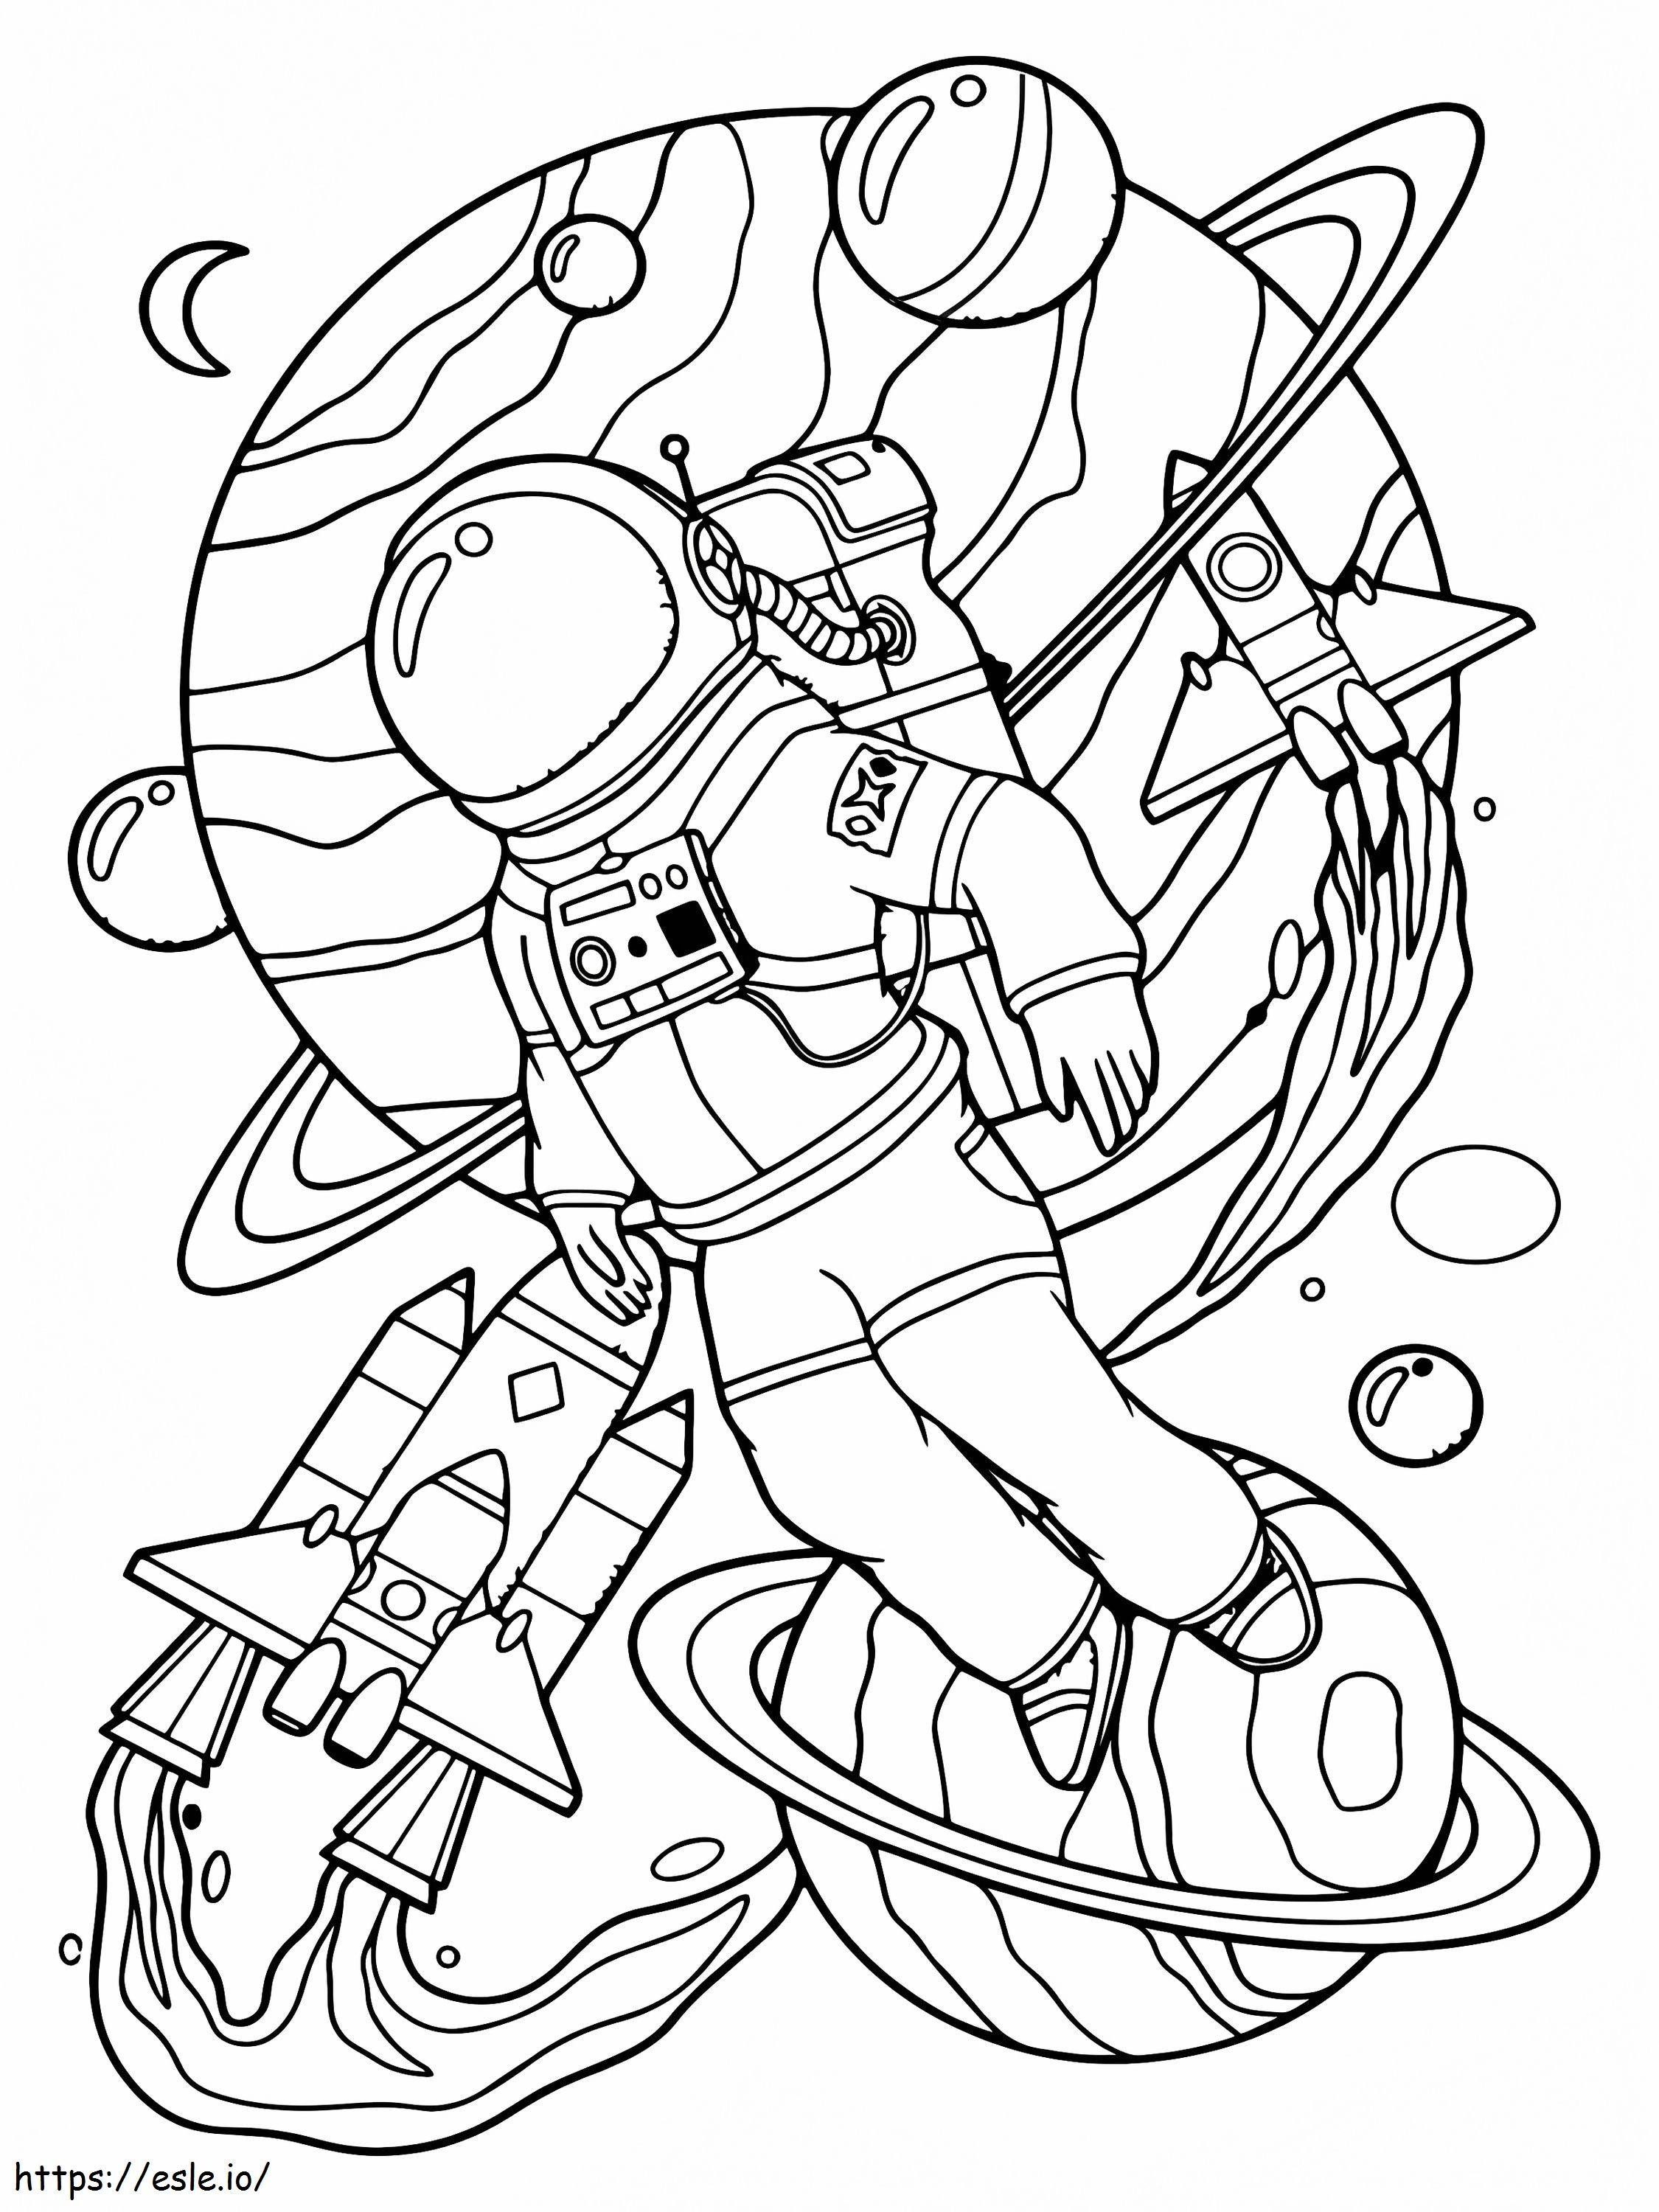 Nasa Astronauts In Space coloring page